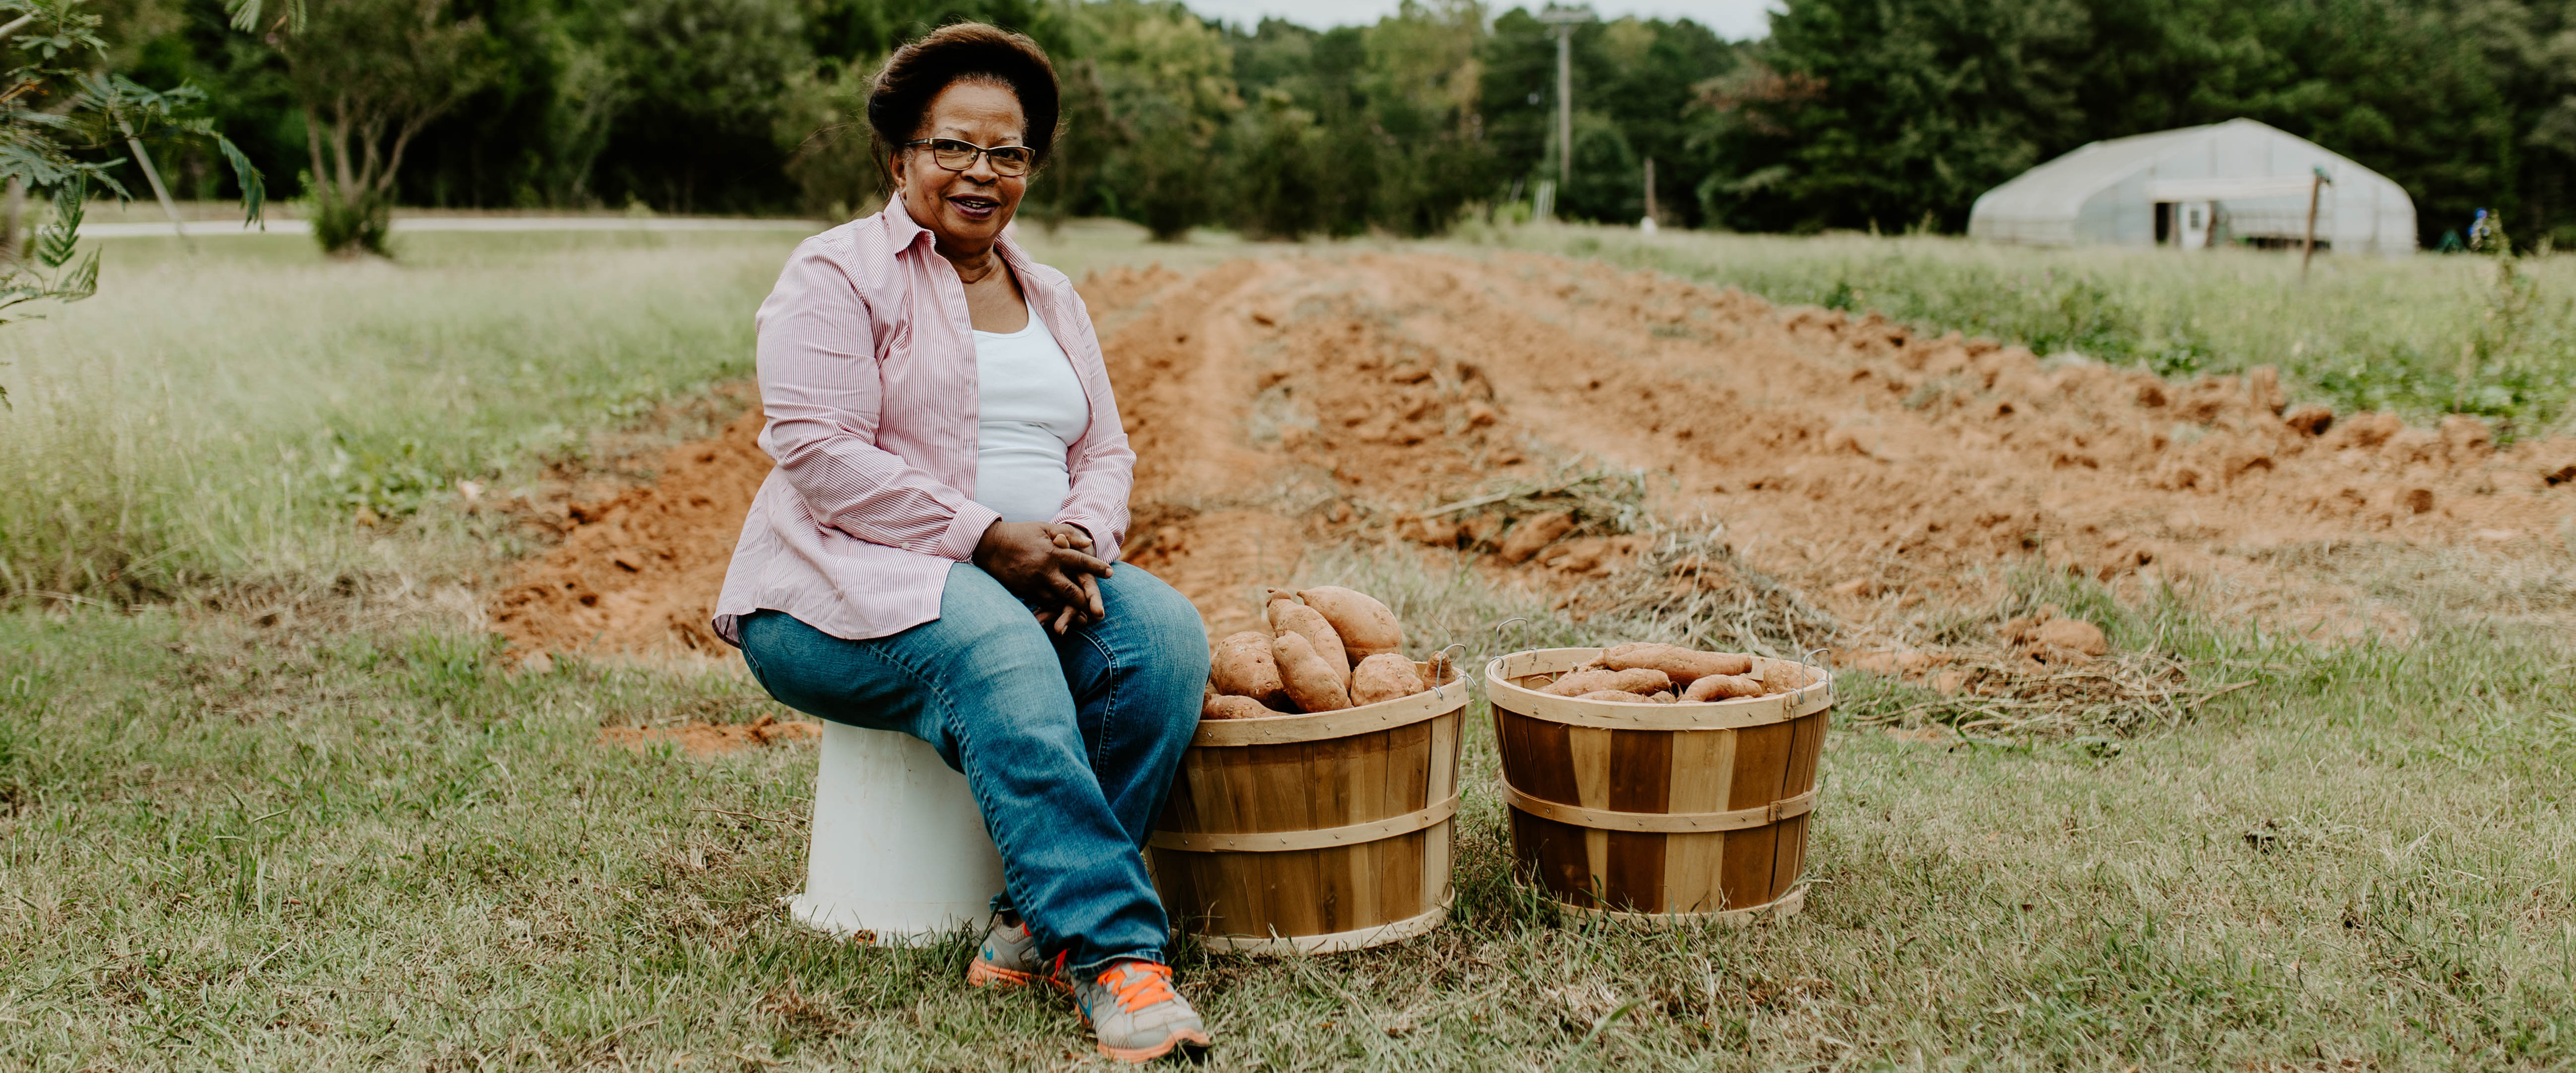 Margaret Harrison on her farm in Southern Greenville County. Photo by Morgan Yelton